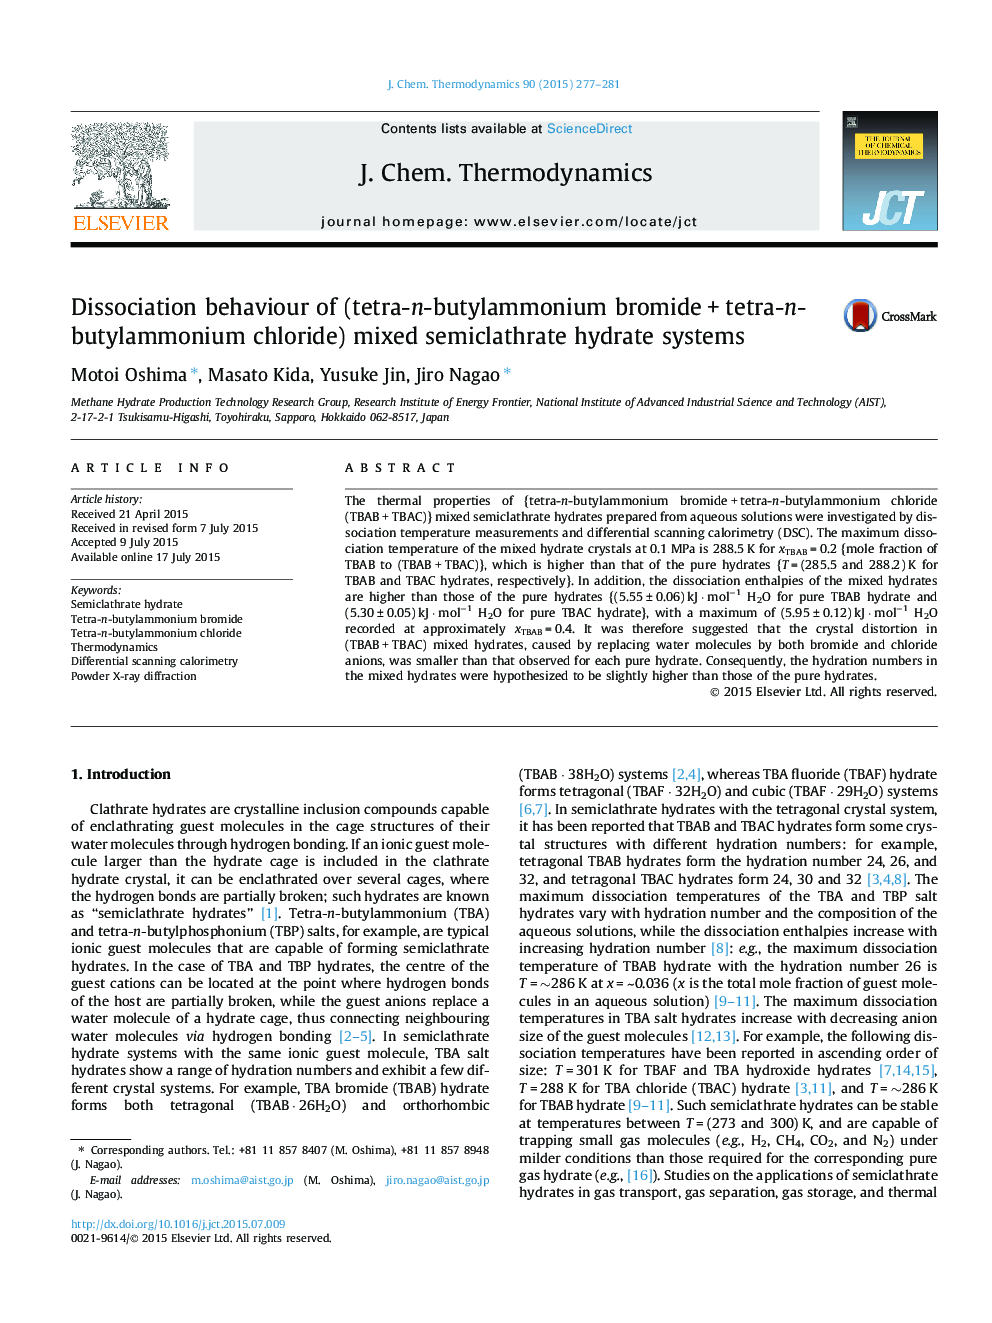 Dissociation behaviour of (tetra-n-butylammonium bromideÂ +Â tetra-n-butylammonium chloride) mixed semiclathrate hydrate systems